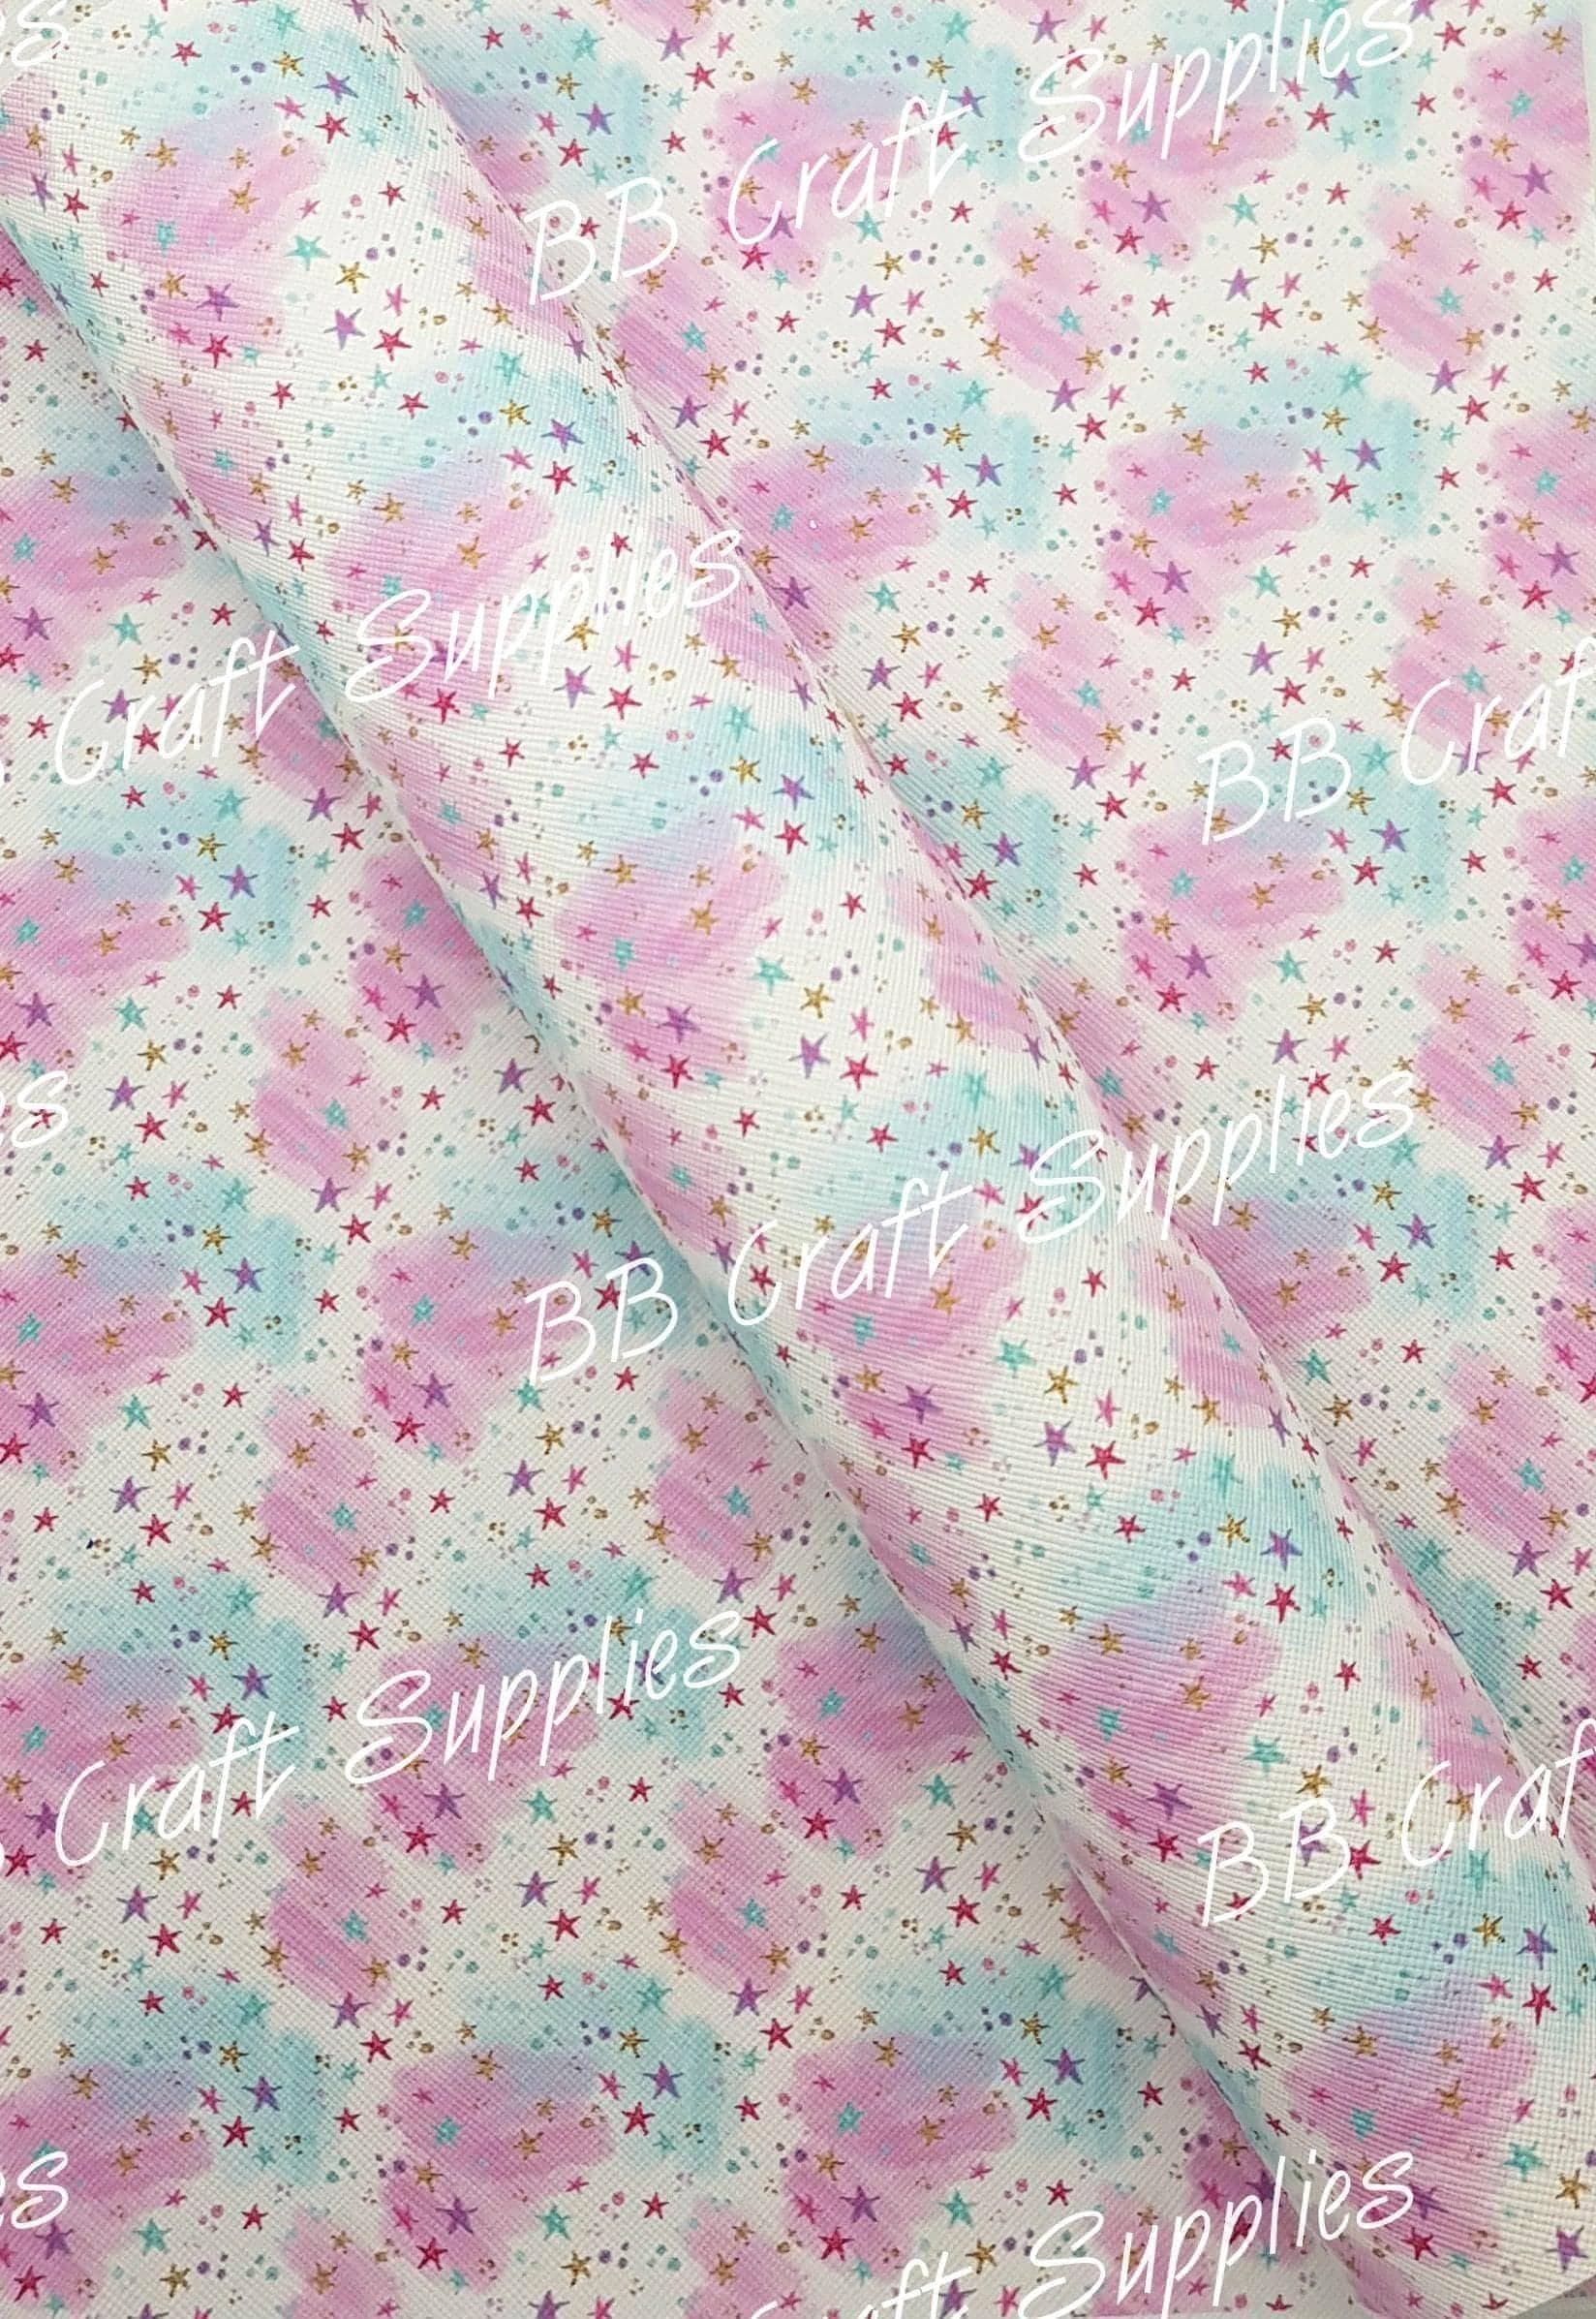 Starry Night Faux Leather - colourful, Faux, Faux Leather, Leather, leatherette, night, pattern, sky, starry, Whats new - Bare Butler Faux Leather Supplies 